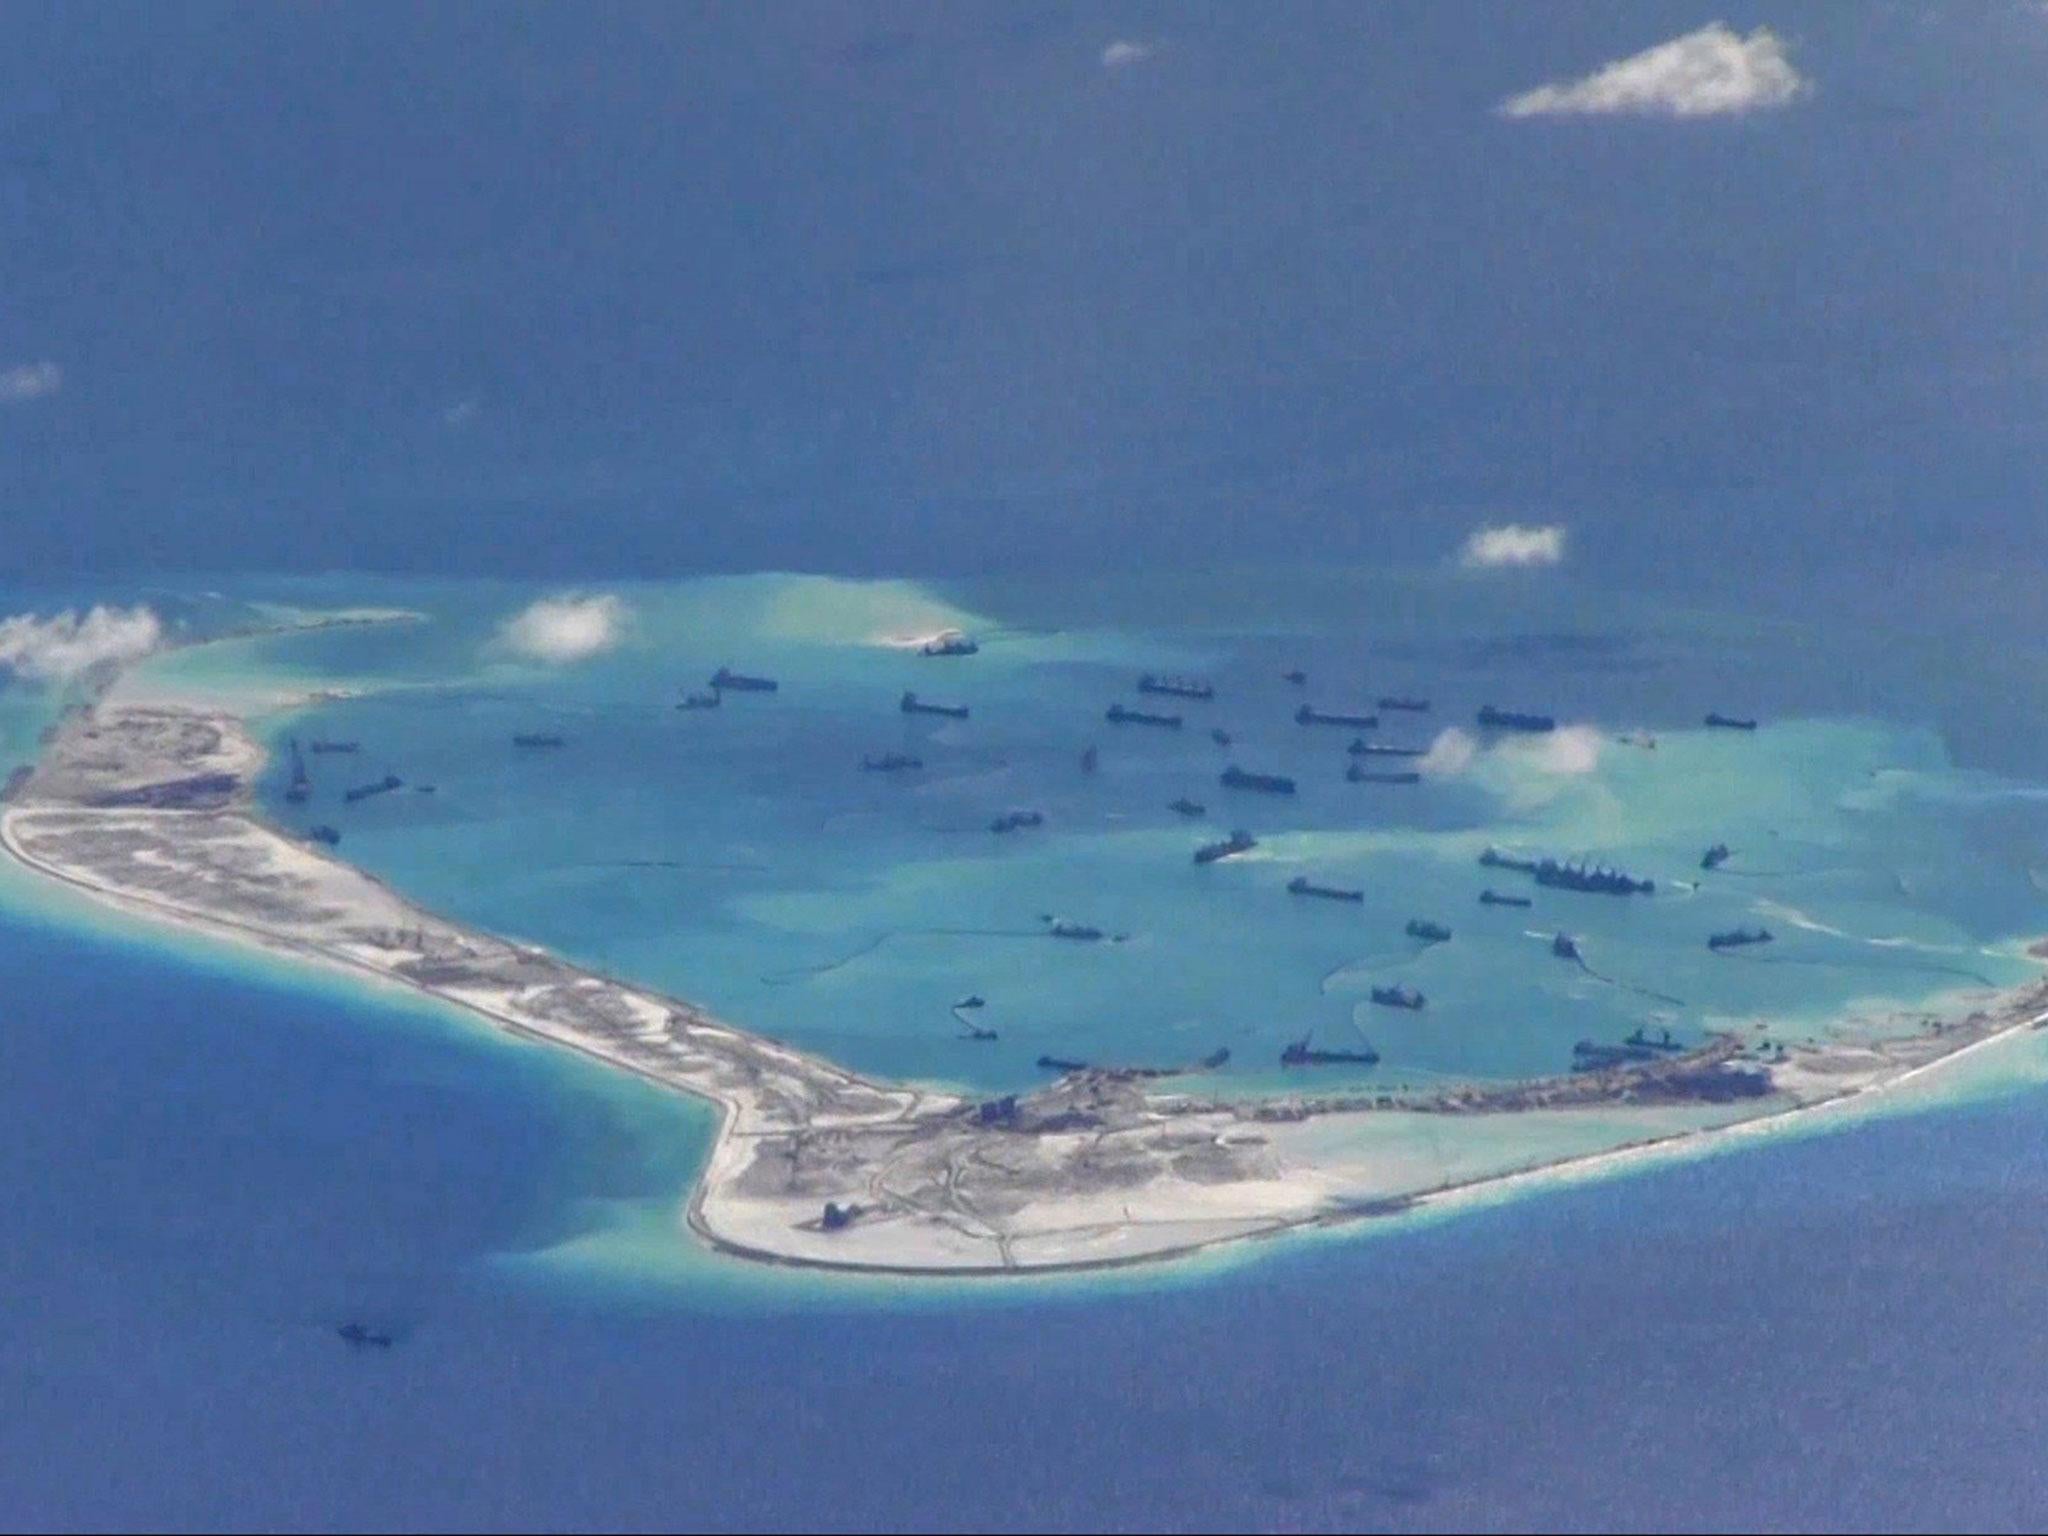 China has conducted extensive land reclamation work at Fiery Cross Reef